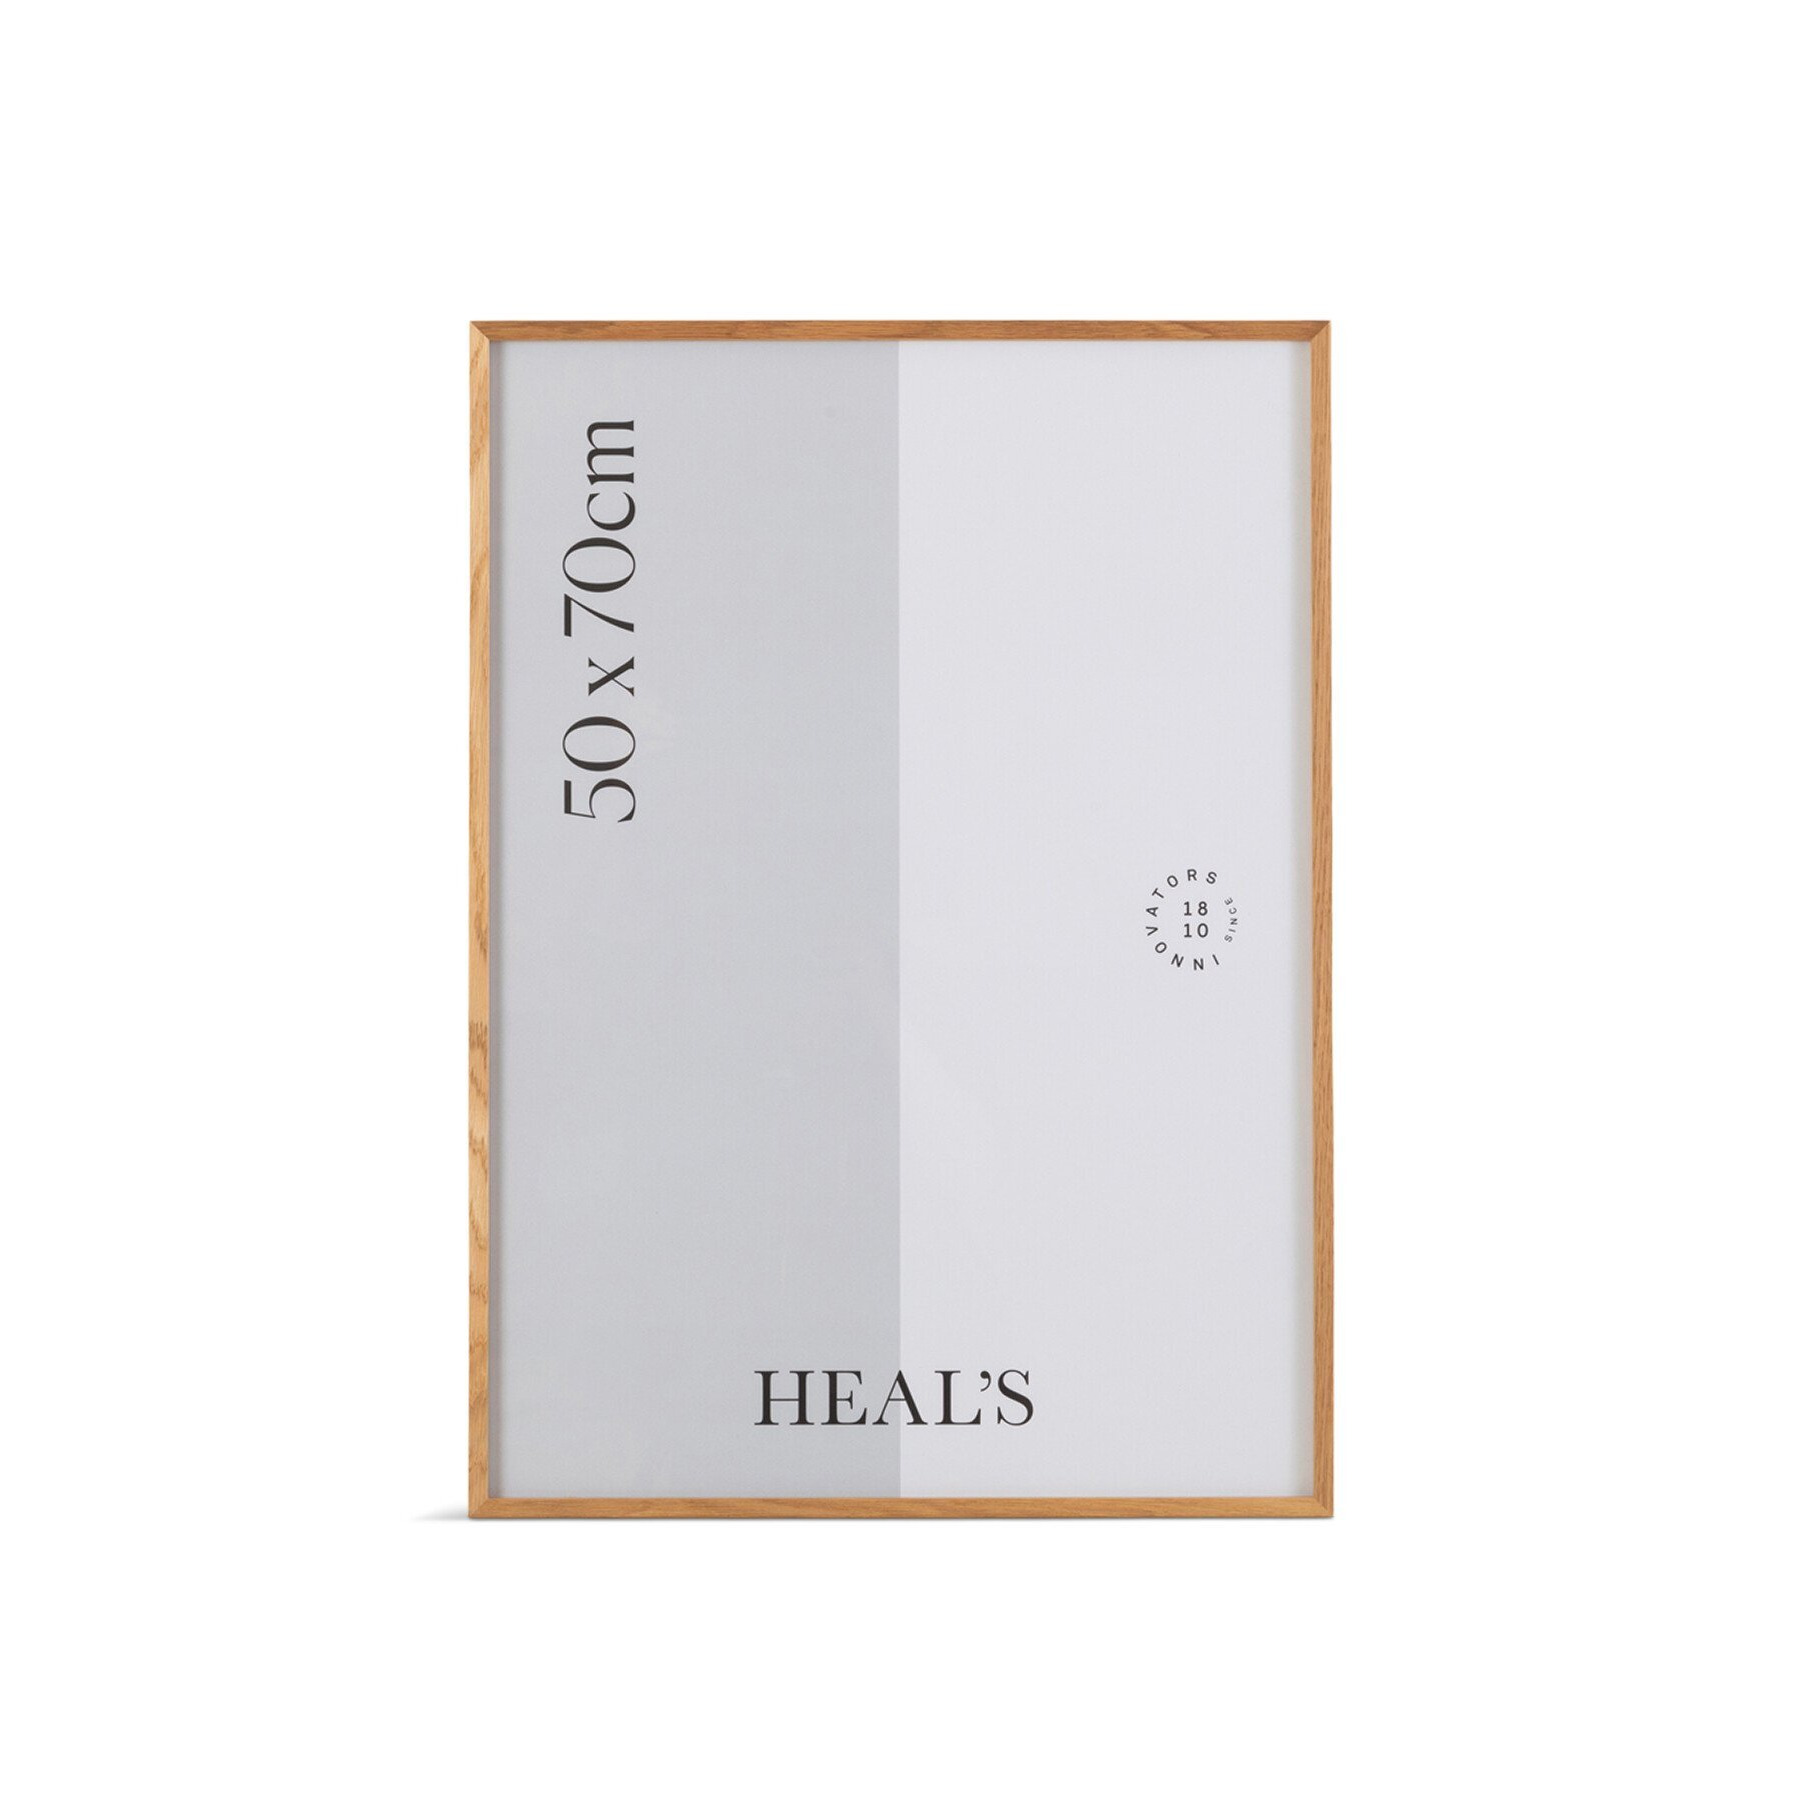 Heal's Gallery Frame - Size 30x40 Brown